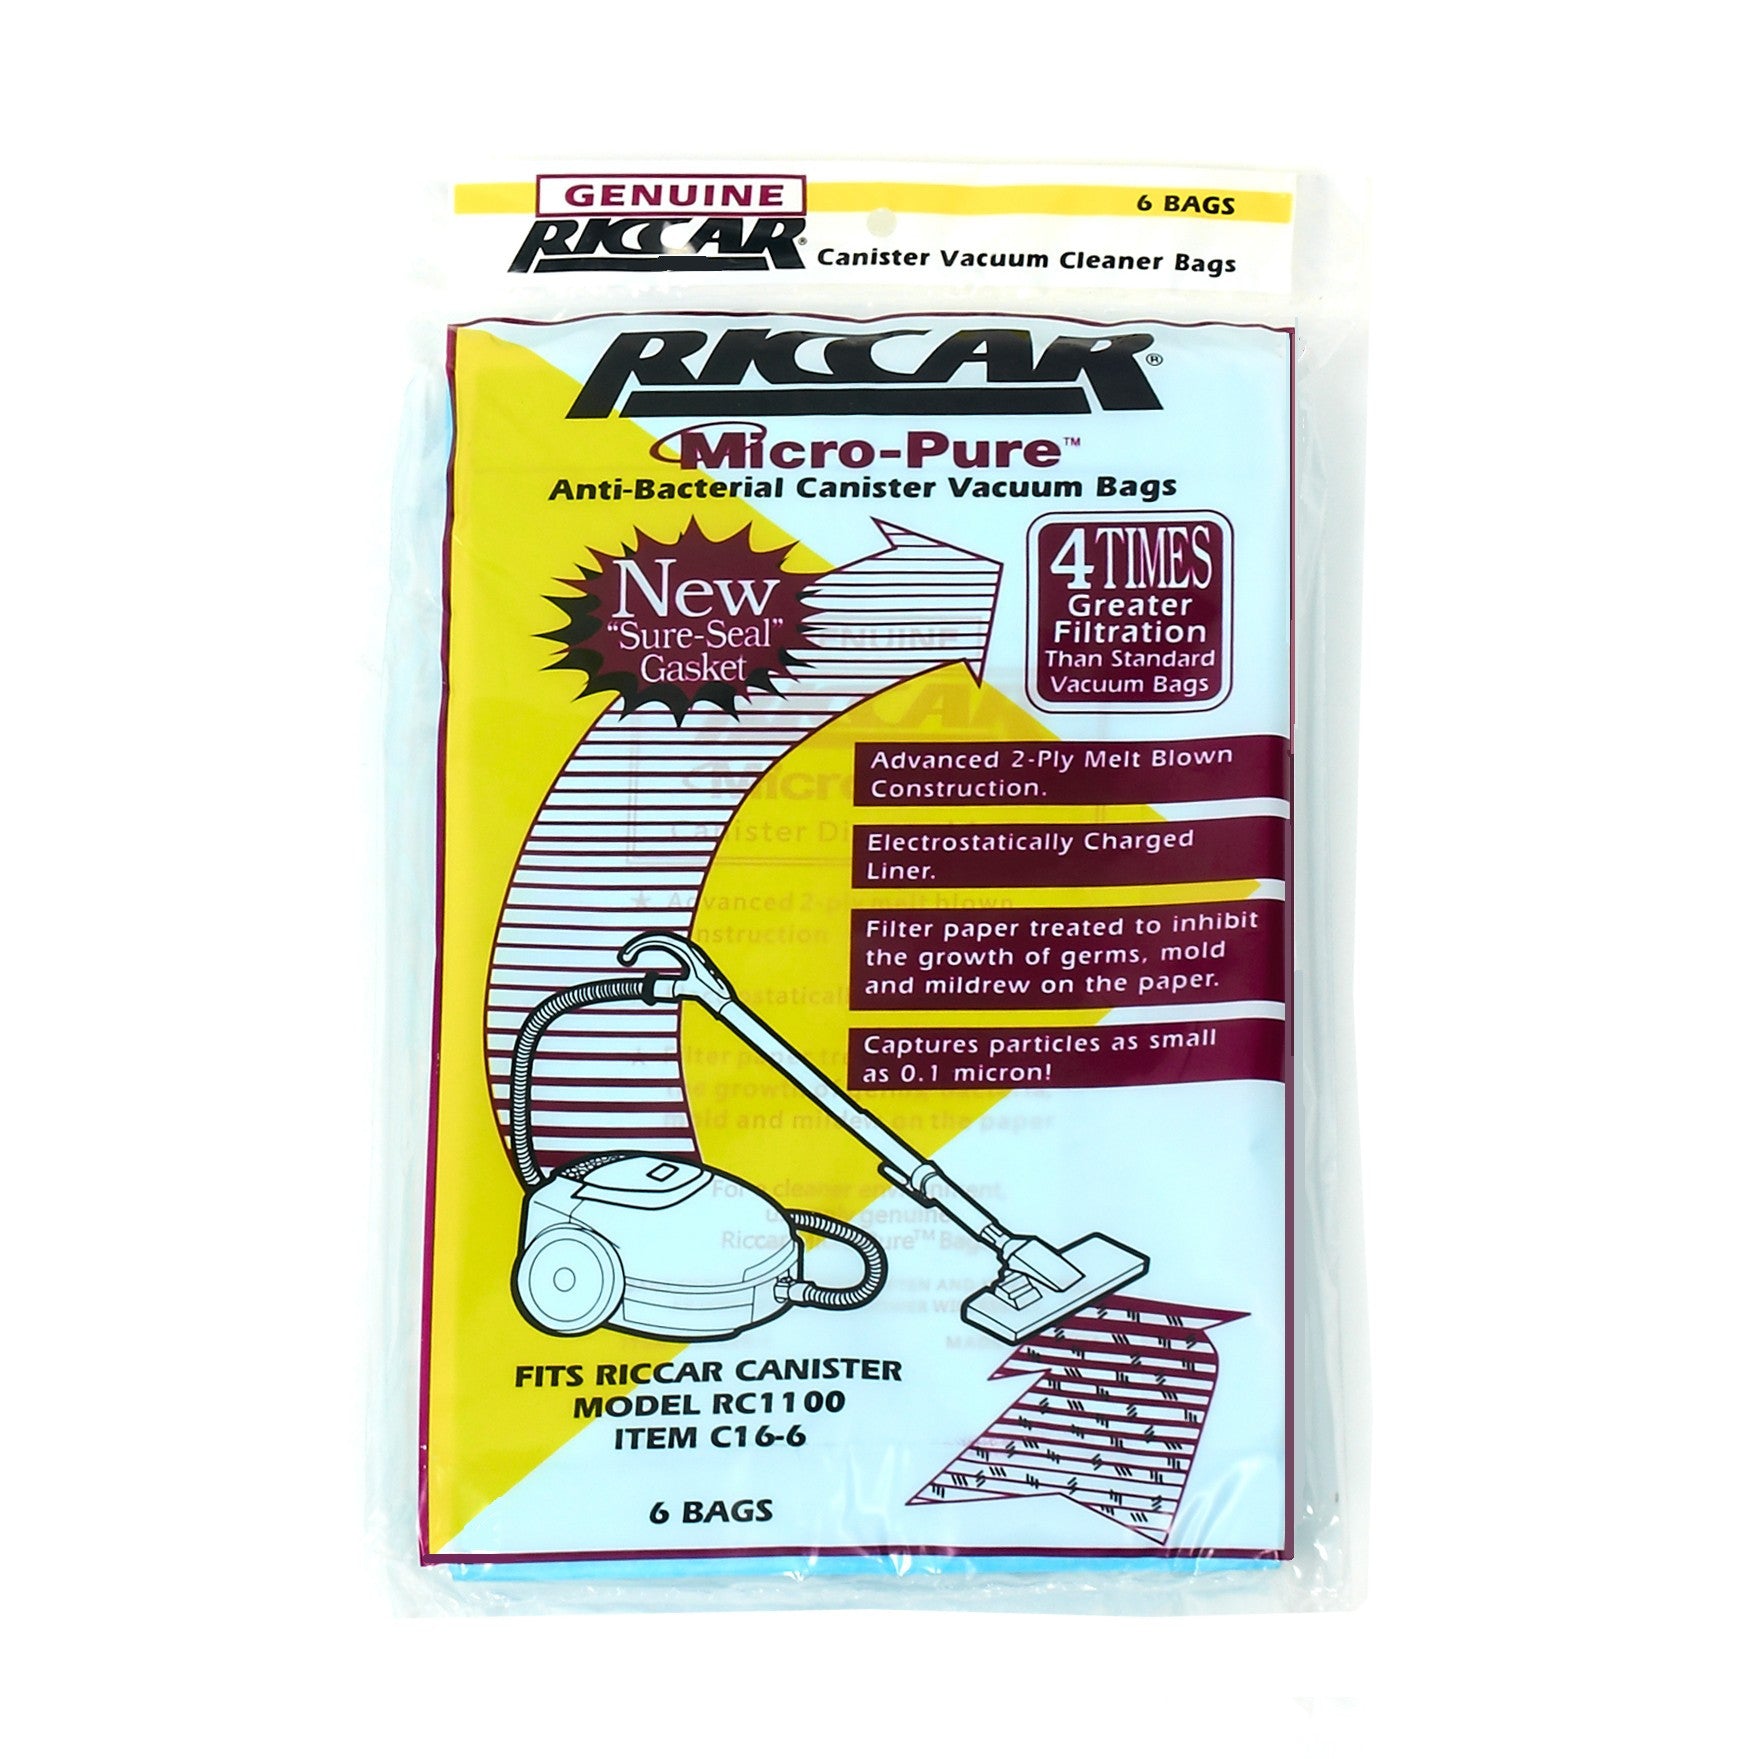 Riccar Model RC1100 canister Vacuum Cleaner Bags # C16-6